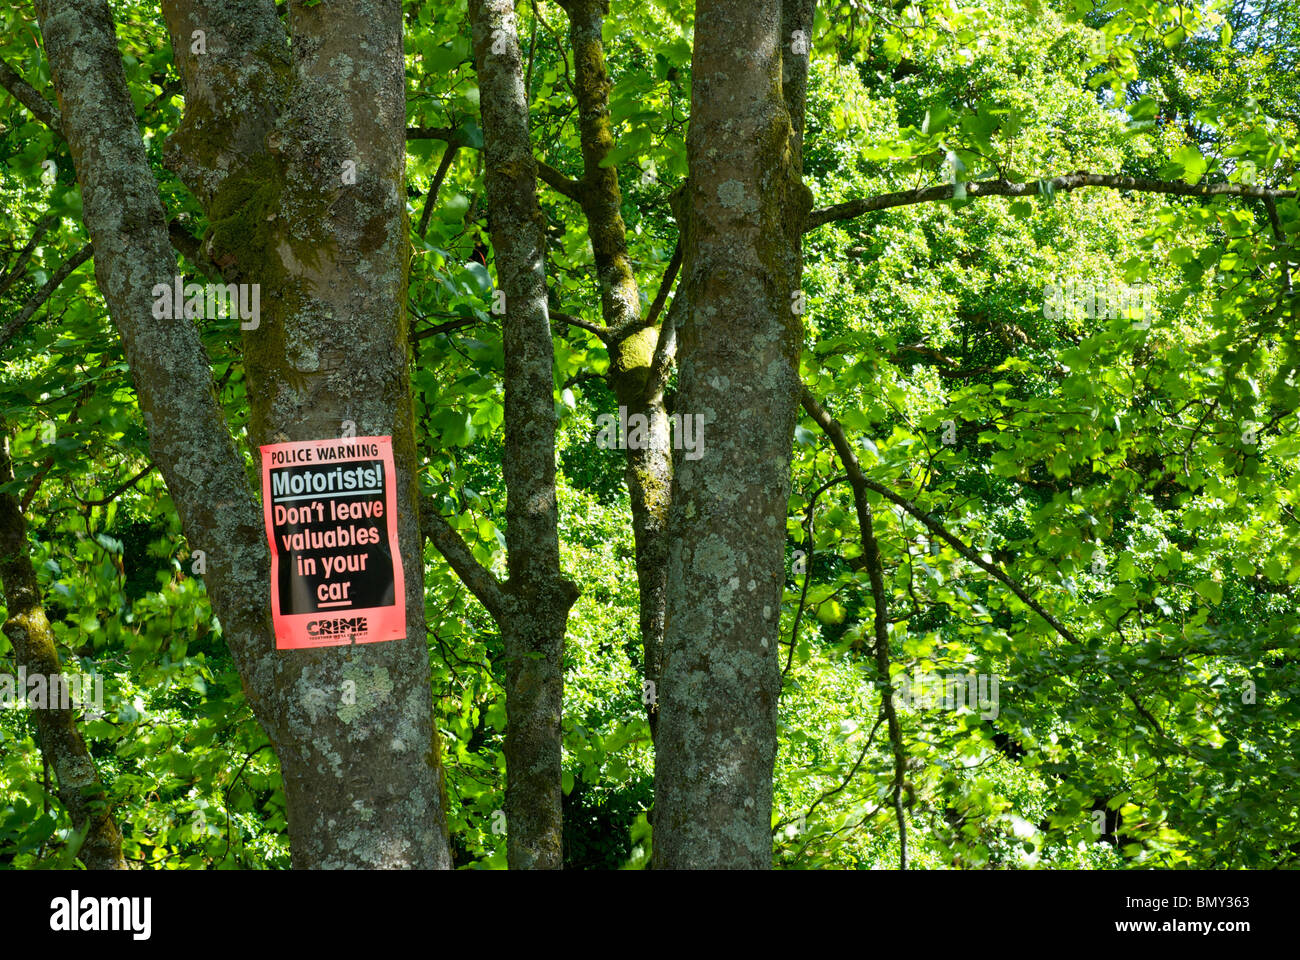 Sign on tree - Motorists, Don't leave valuables in your car - Lake District National Park, Cumbria, England UK Stock Photo